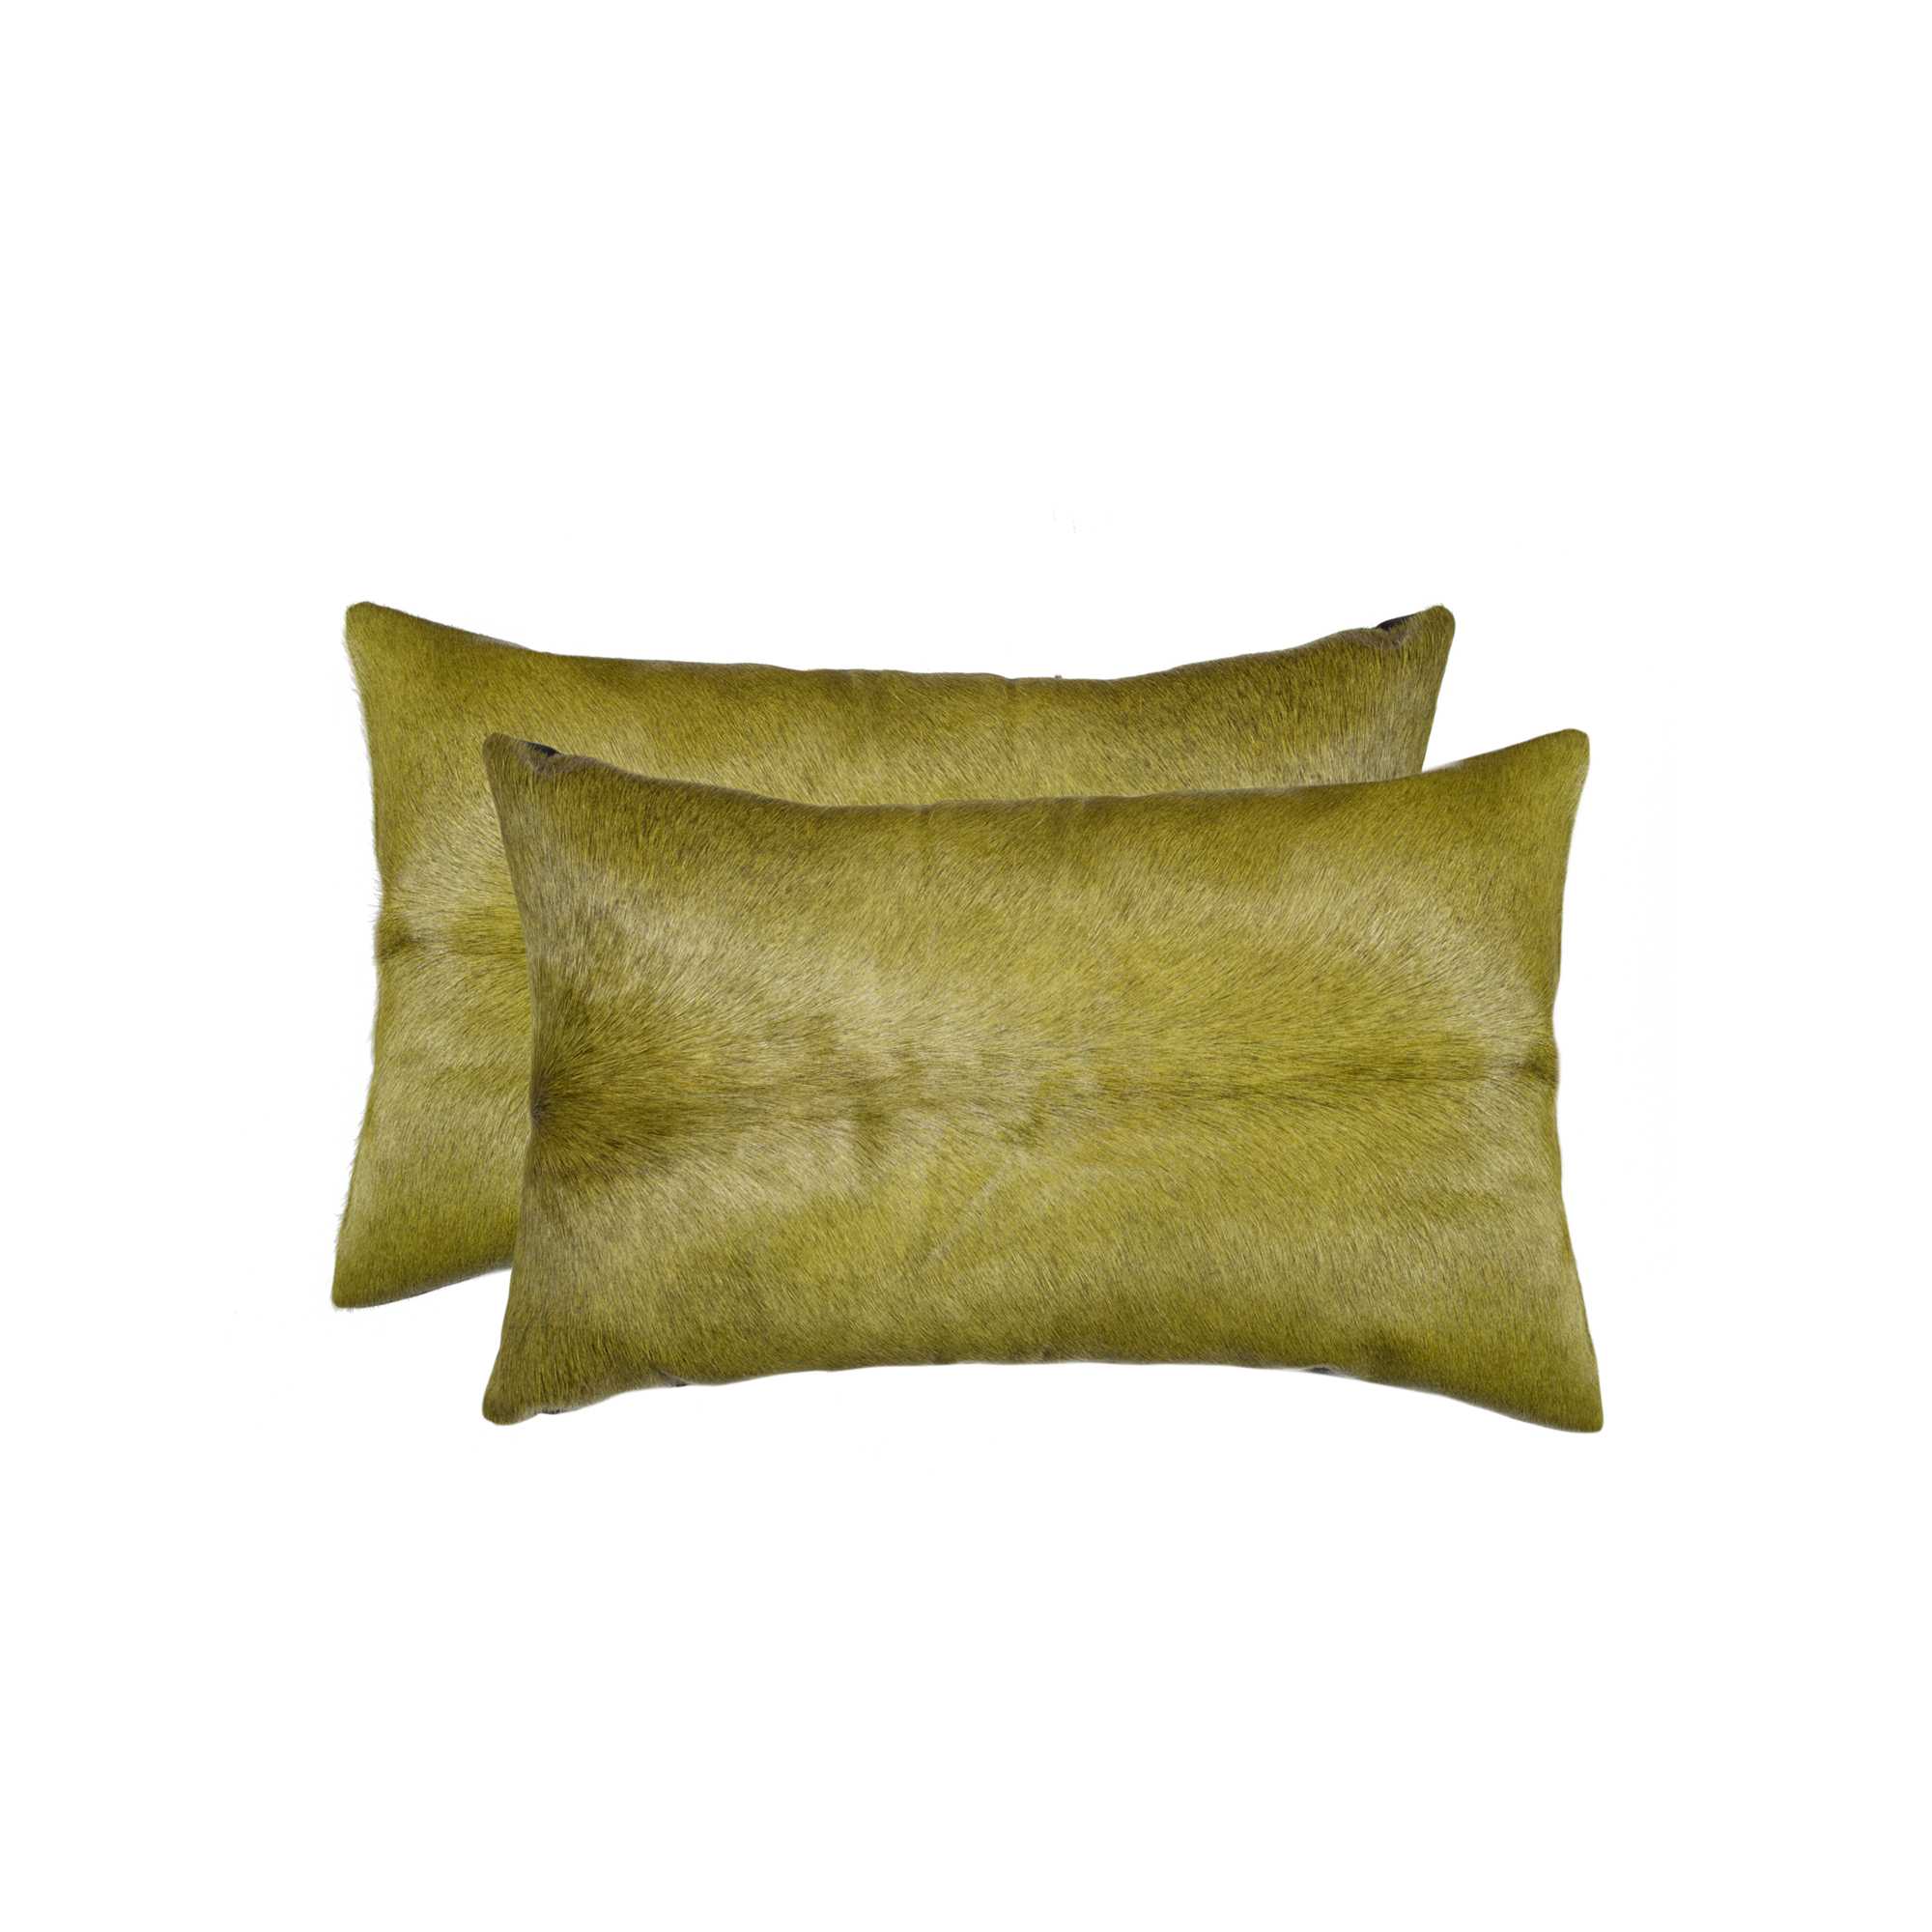 12" x 20" x 5" Lime, Cowhide - Pillow 2-Pack